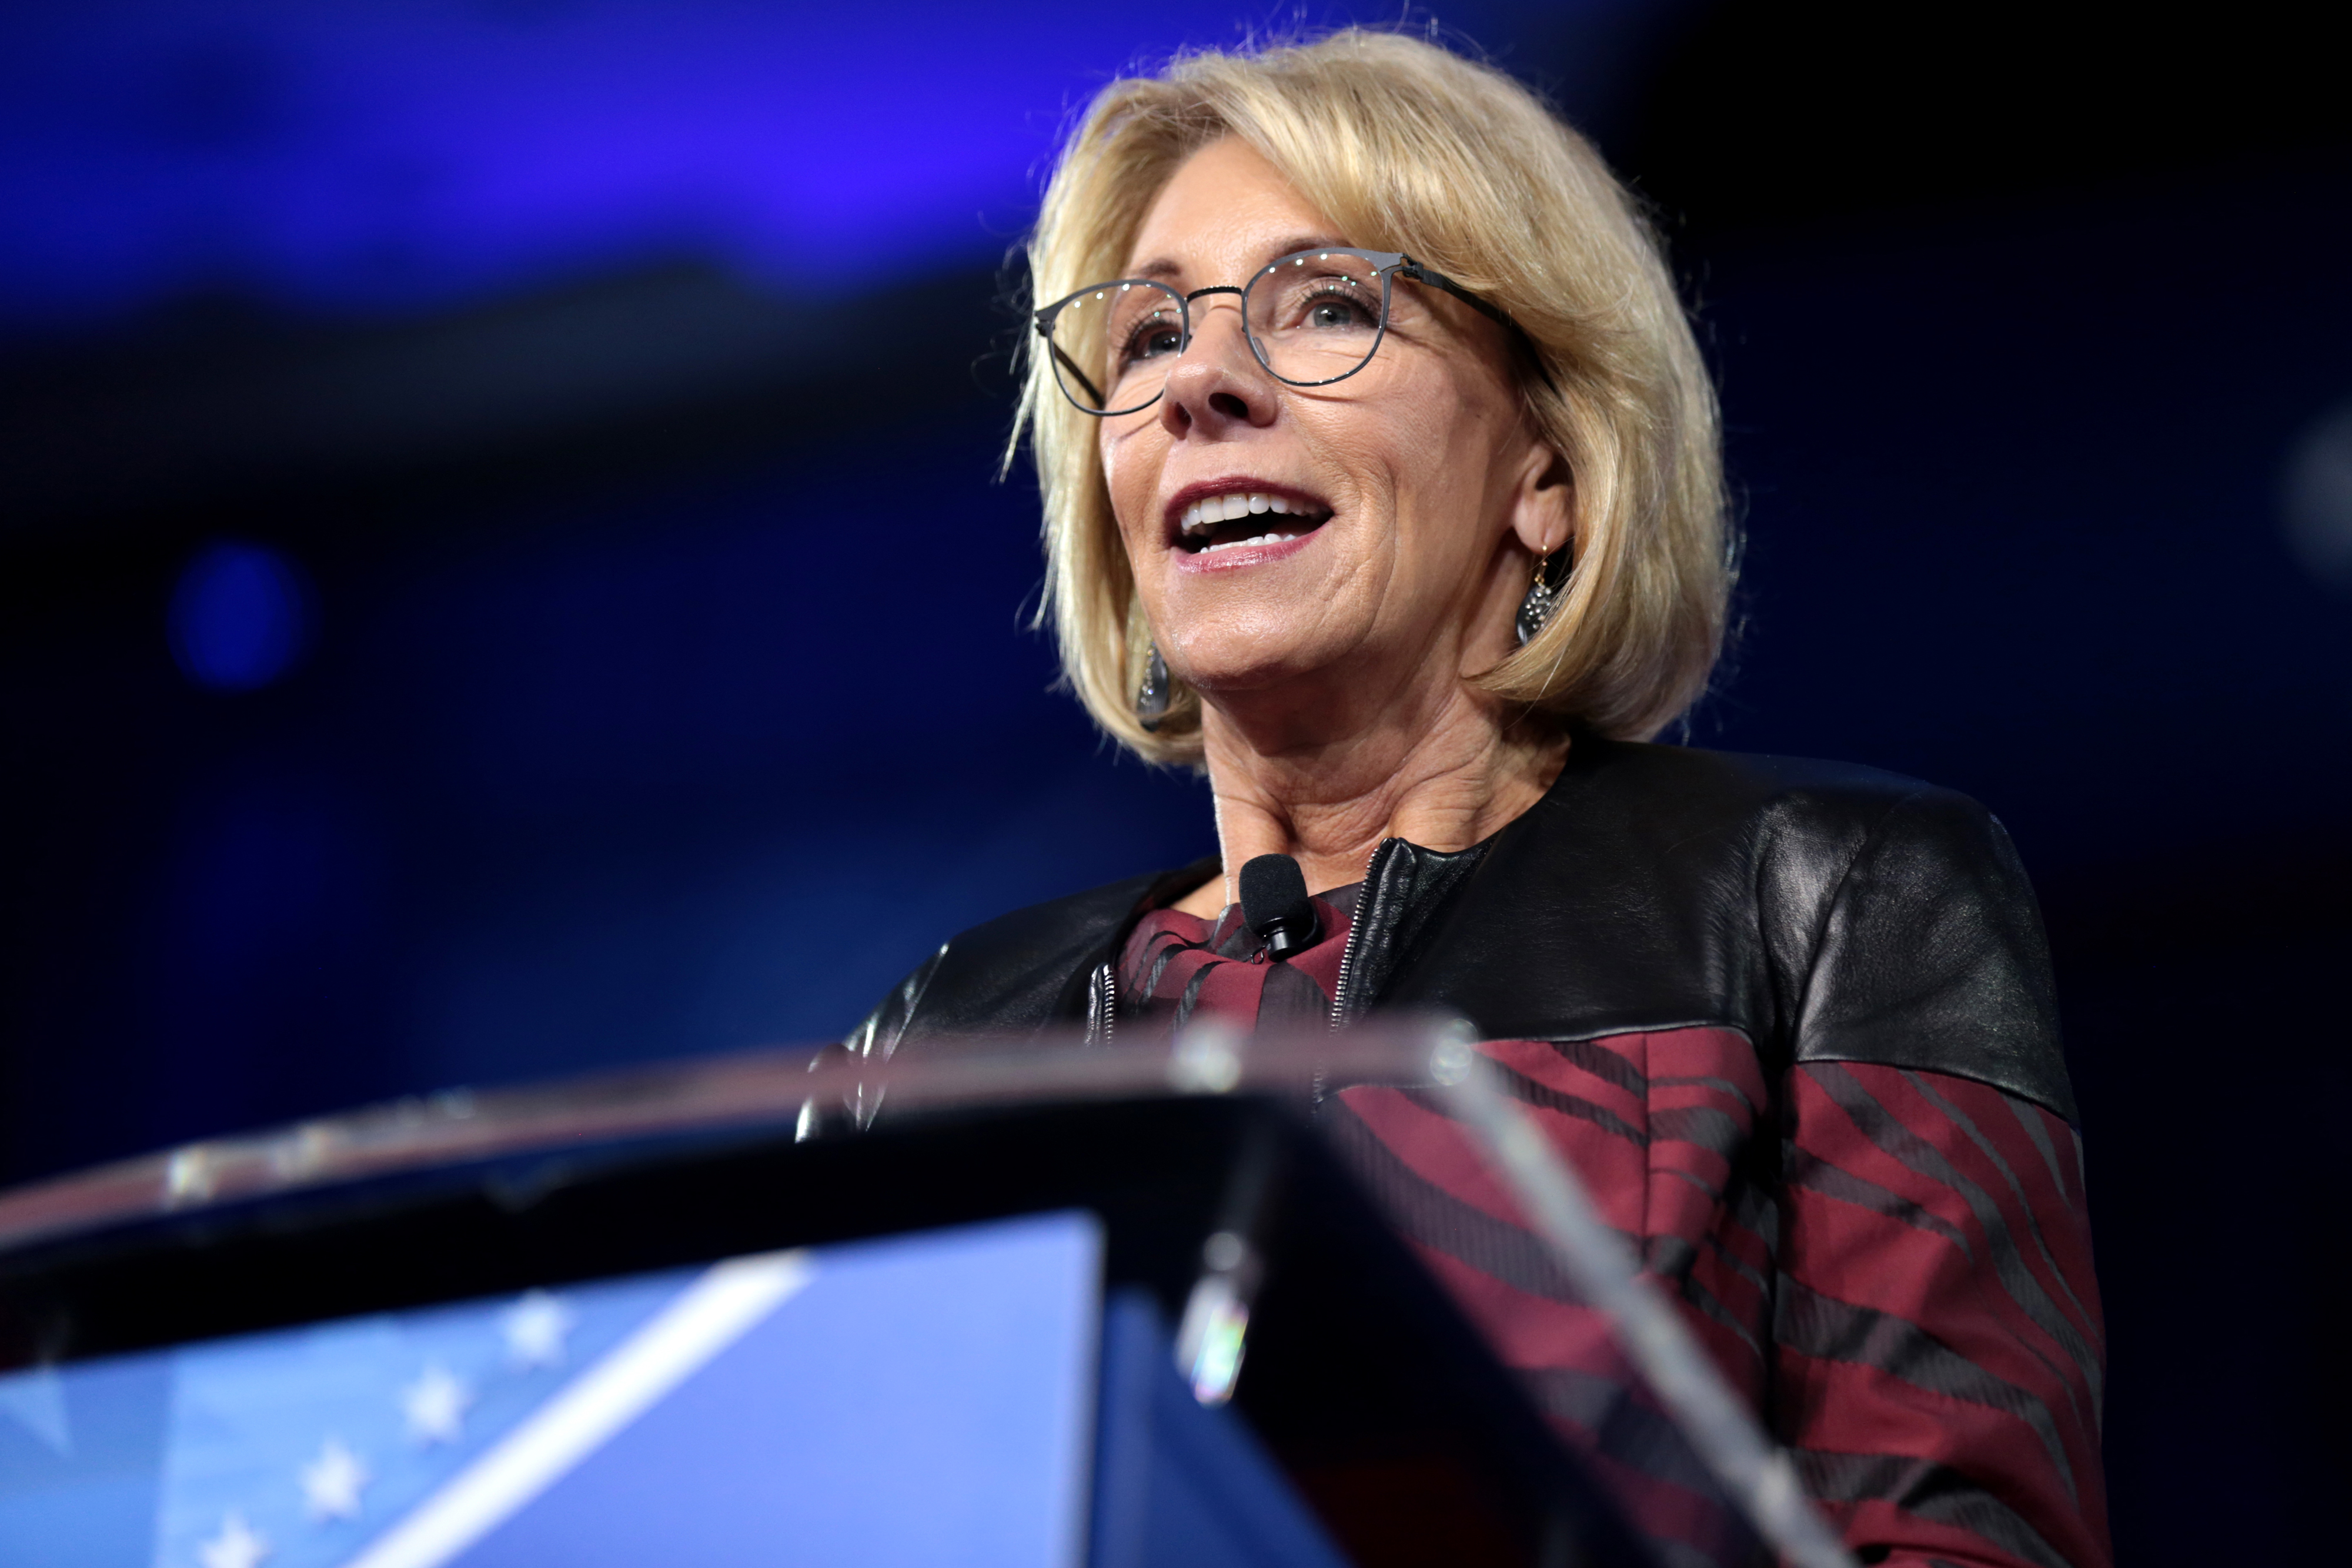 As Pa Schools Face Lawsuits Over Their Sexual Assault Responses Lawyers Weigh in on Betsy DeVos' Proposed Title IX Policies